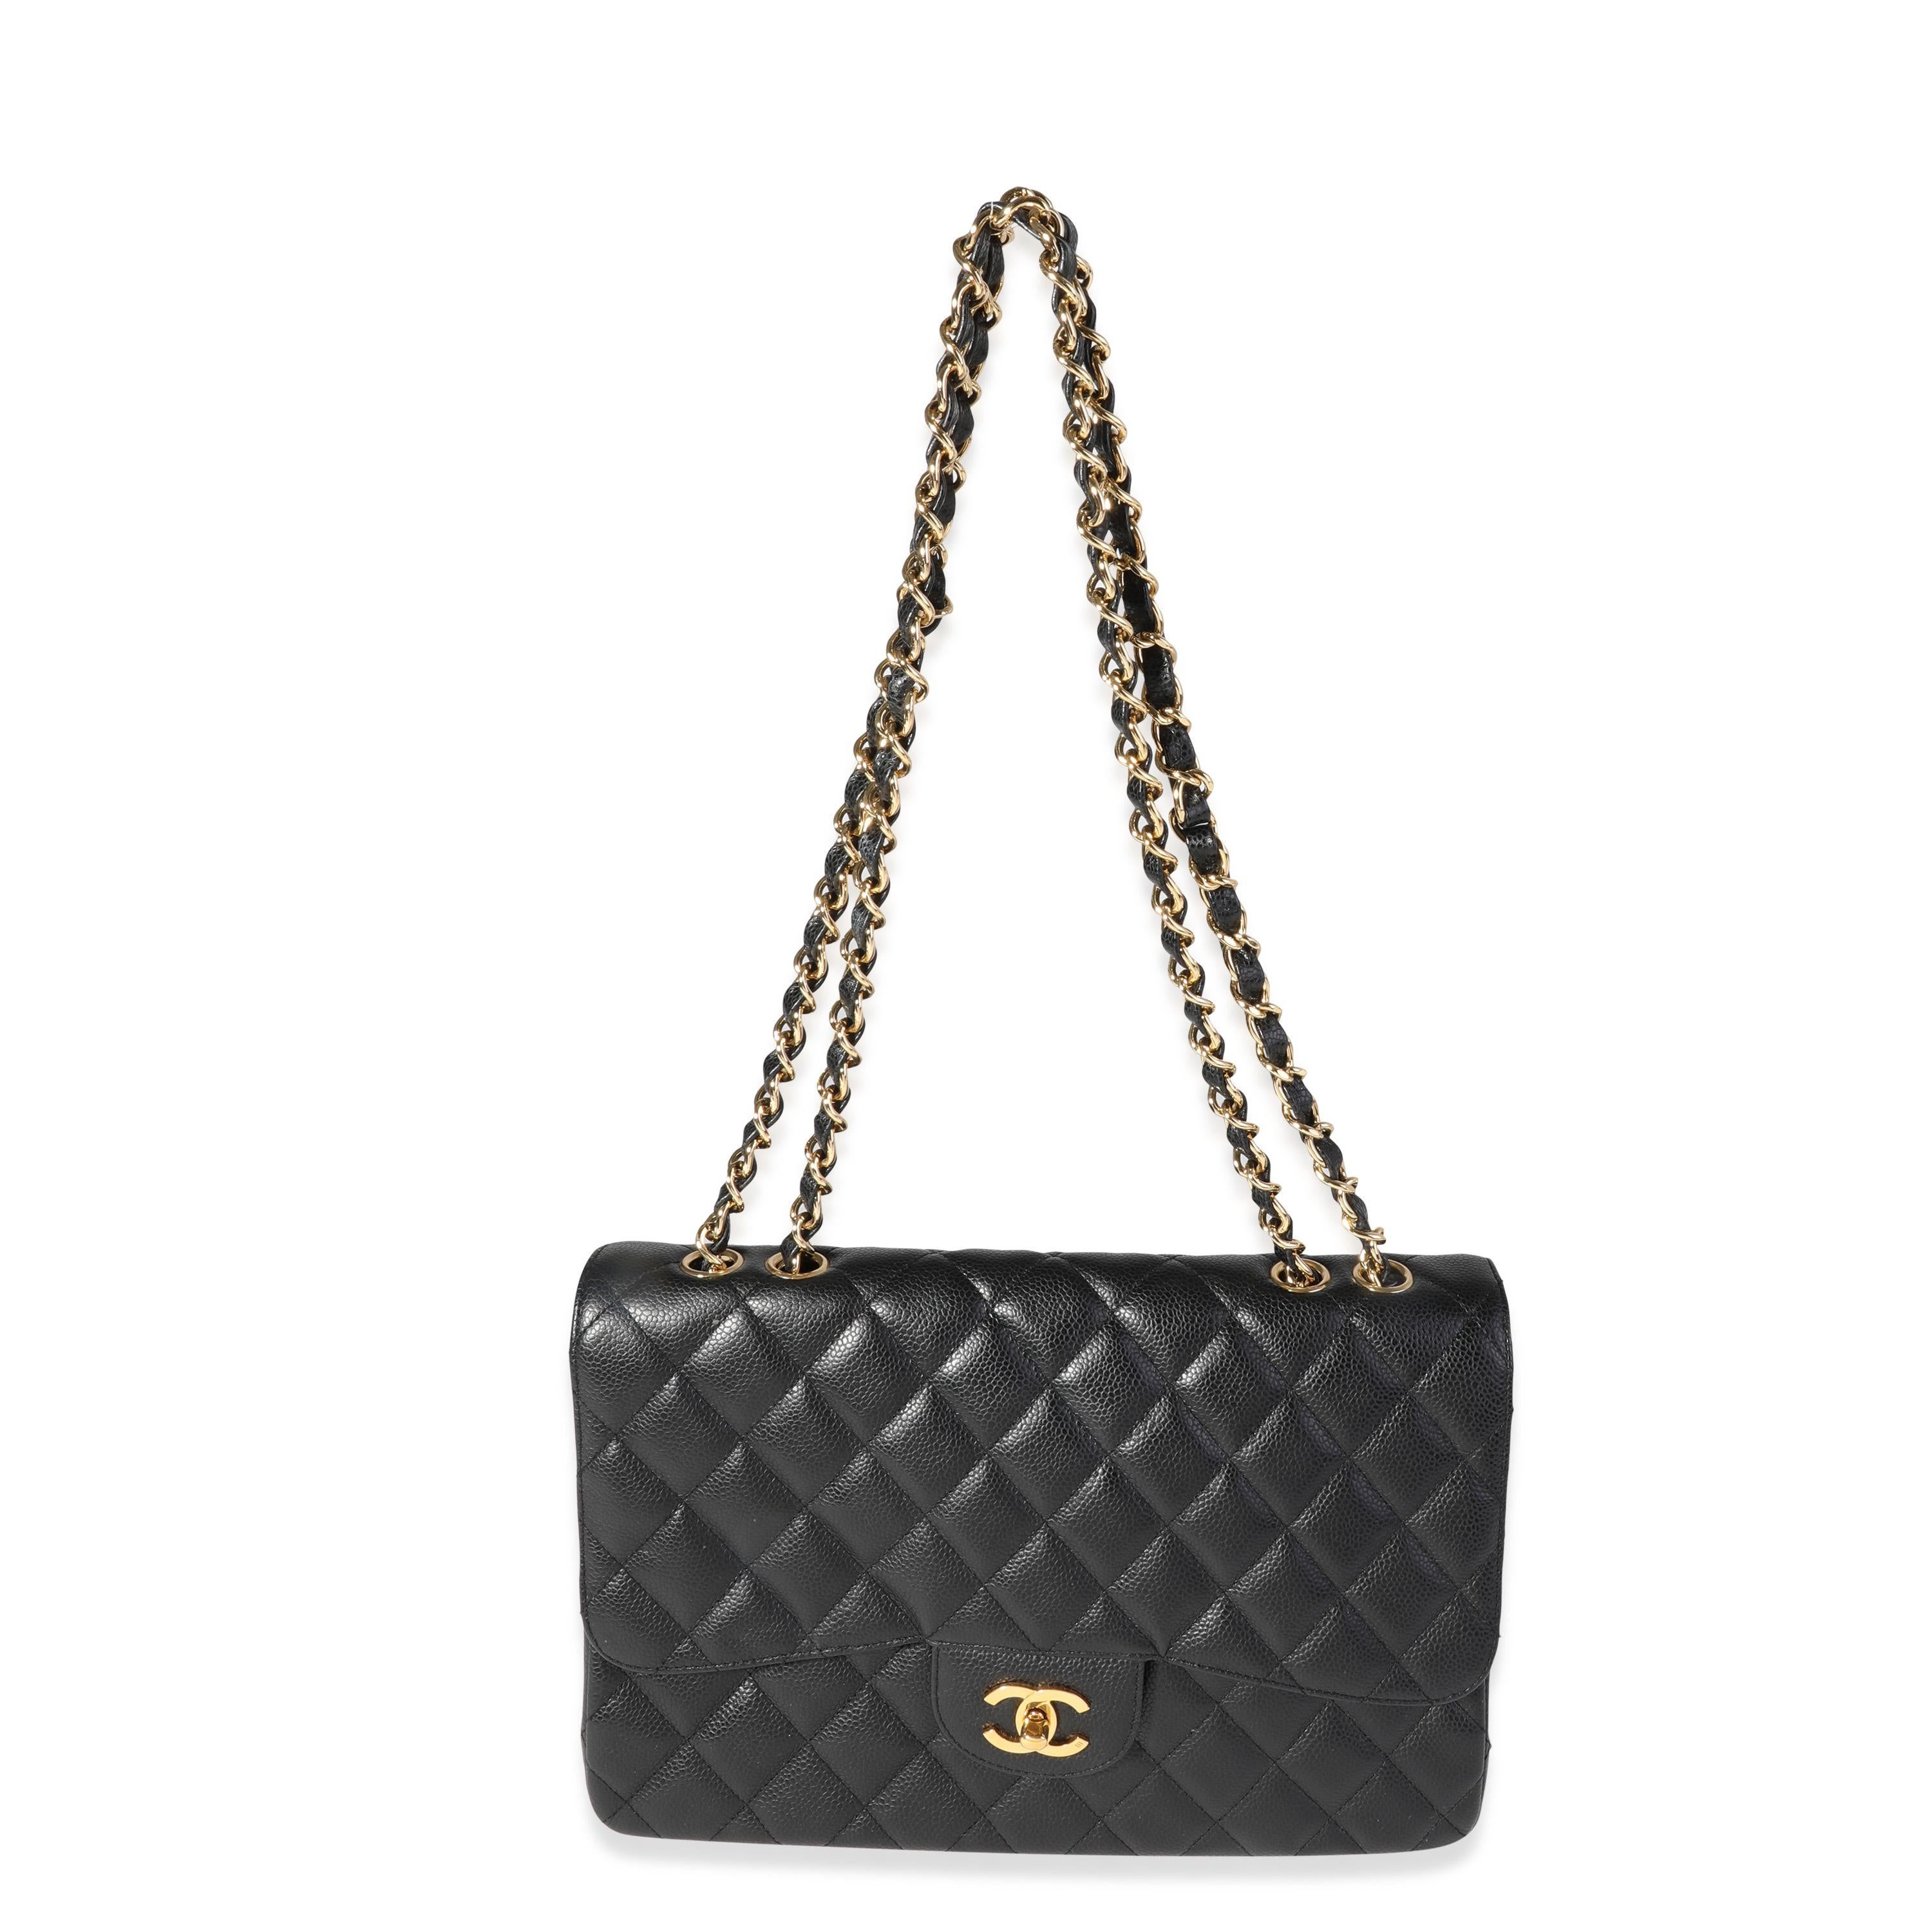 Listing Title: Chanel Black Quilted Caviar Jumbo Classic Single Flap Bag
SKU: 120349
MSRP: 9500.00

Handbag Condition: Very Good
Condition Comments: Very Good Condition. Scuffing to exterior corners. Scratching to hardware. Scuffing to interior